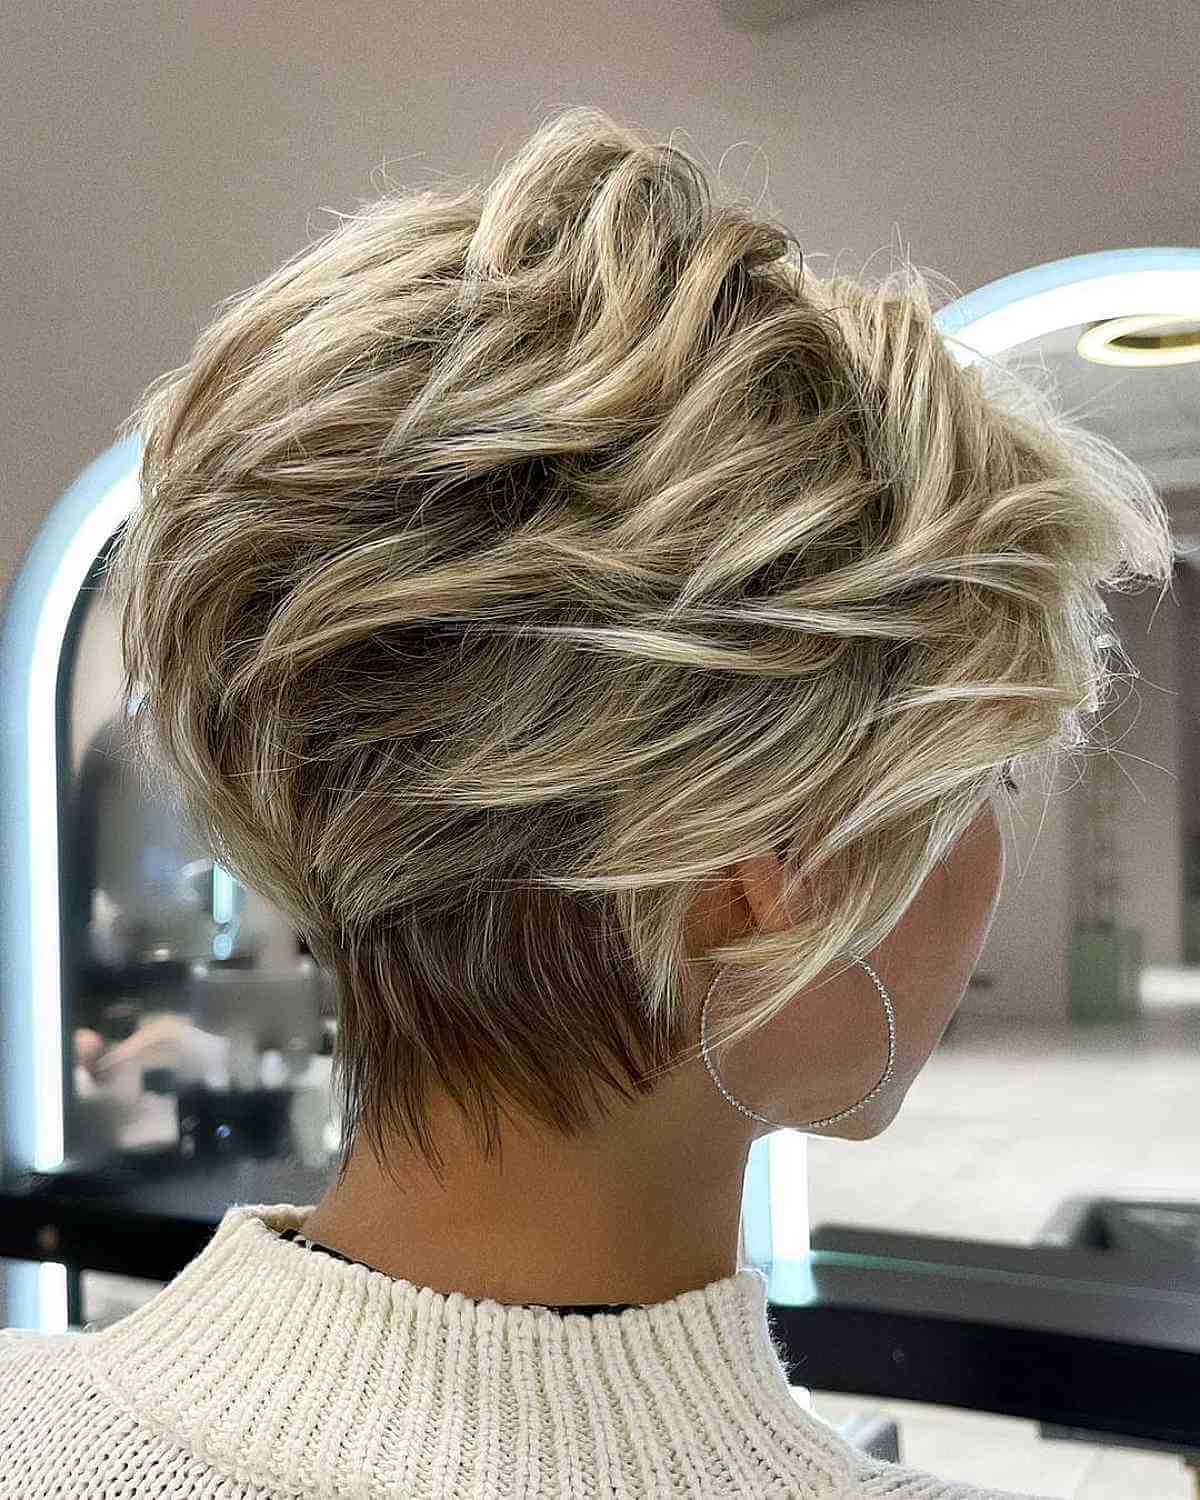 50 Short Hairstyles That Looks so Sassy : Pixie Haircut for Thick Hair